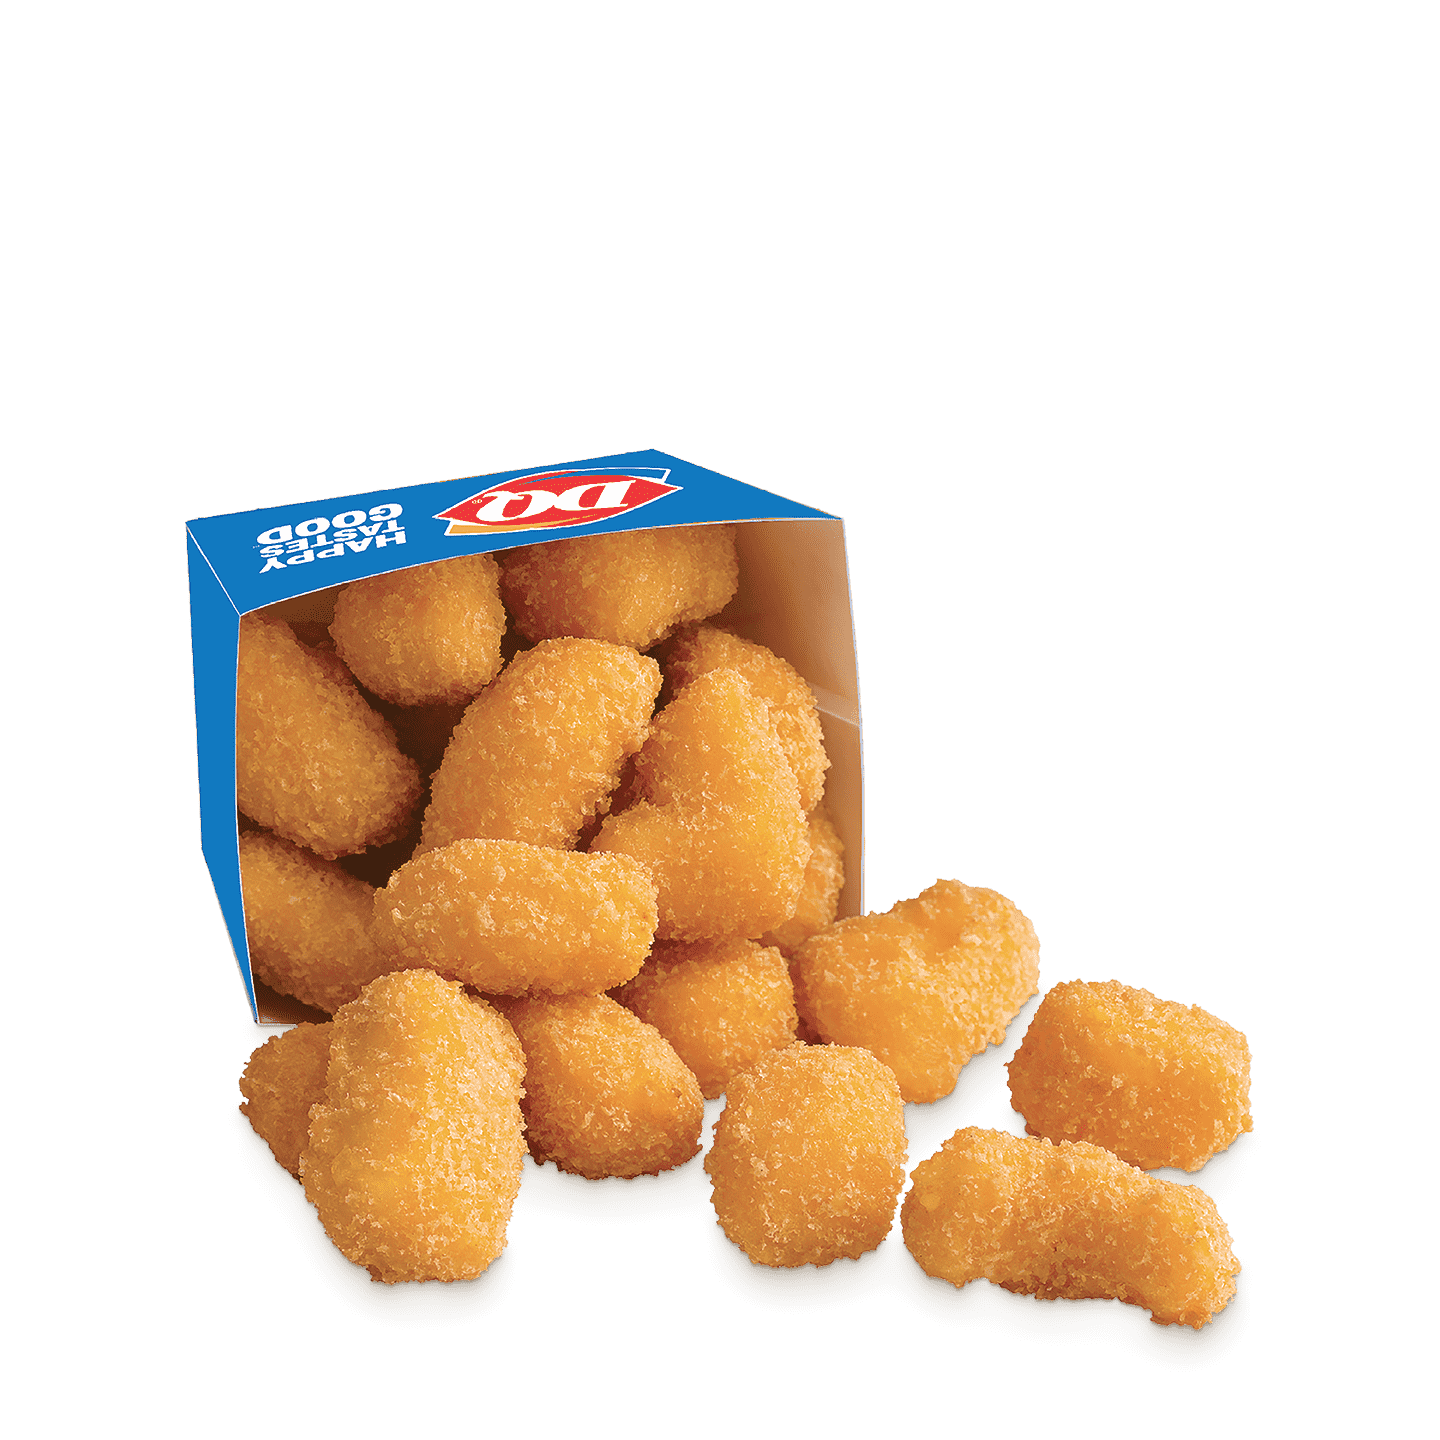 Large Cheese Curds